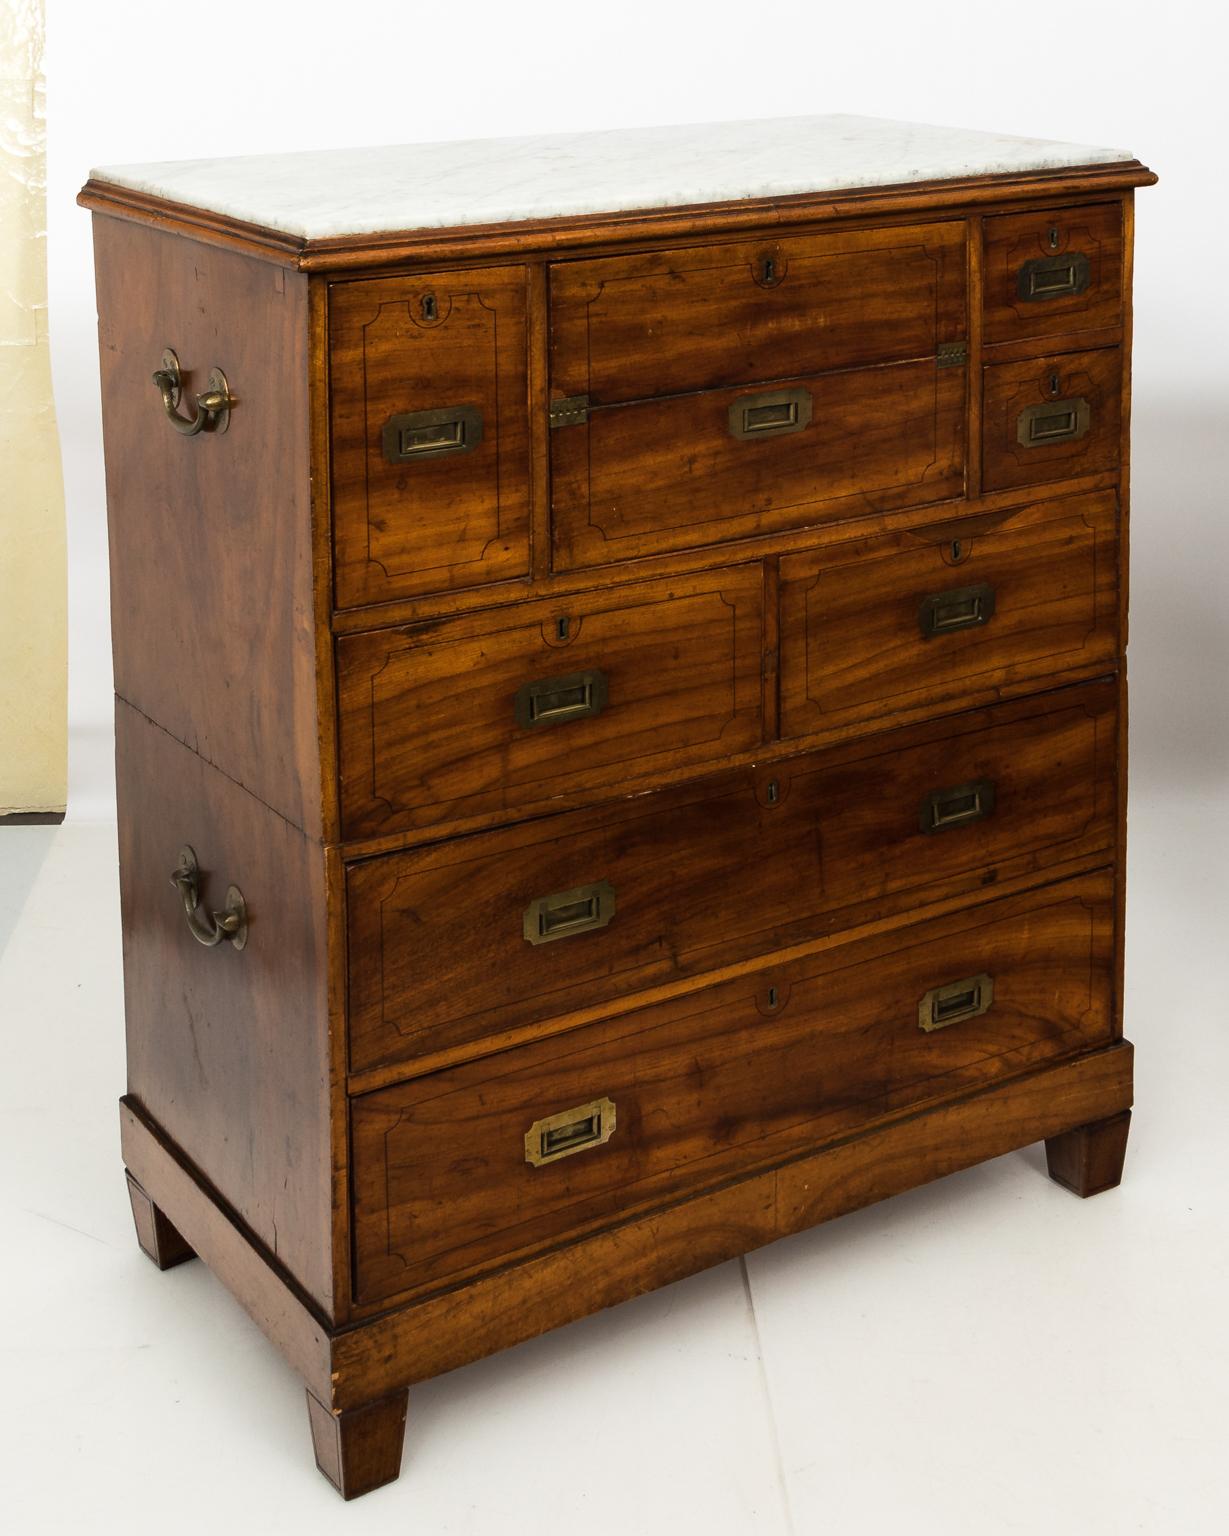 Camphorwood, two-part marble top British Campaign chest with 7 drawers and an embossed leather desk surface. Brass details and recessed pulls. Originally carved feet and a set of 4 optional bun feet.